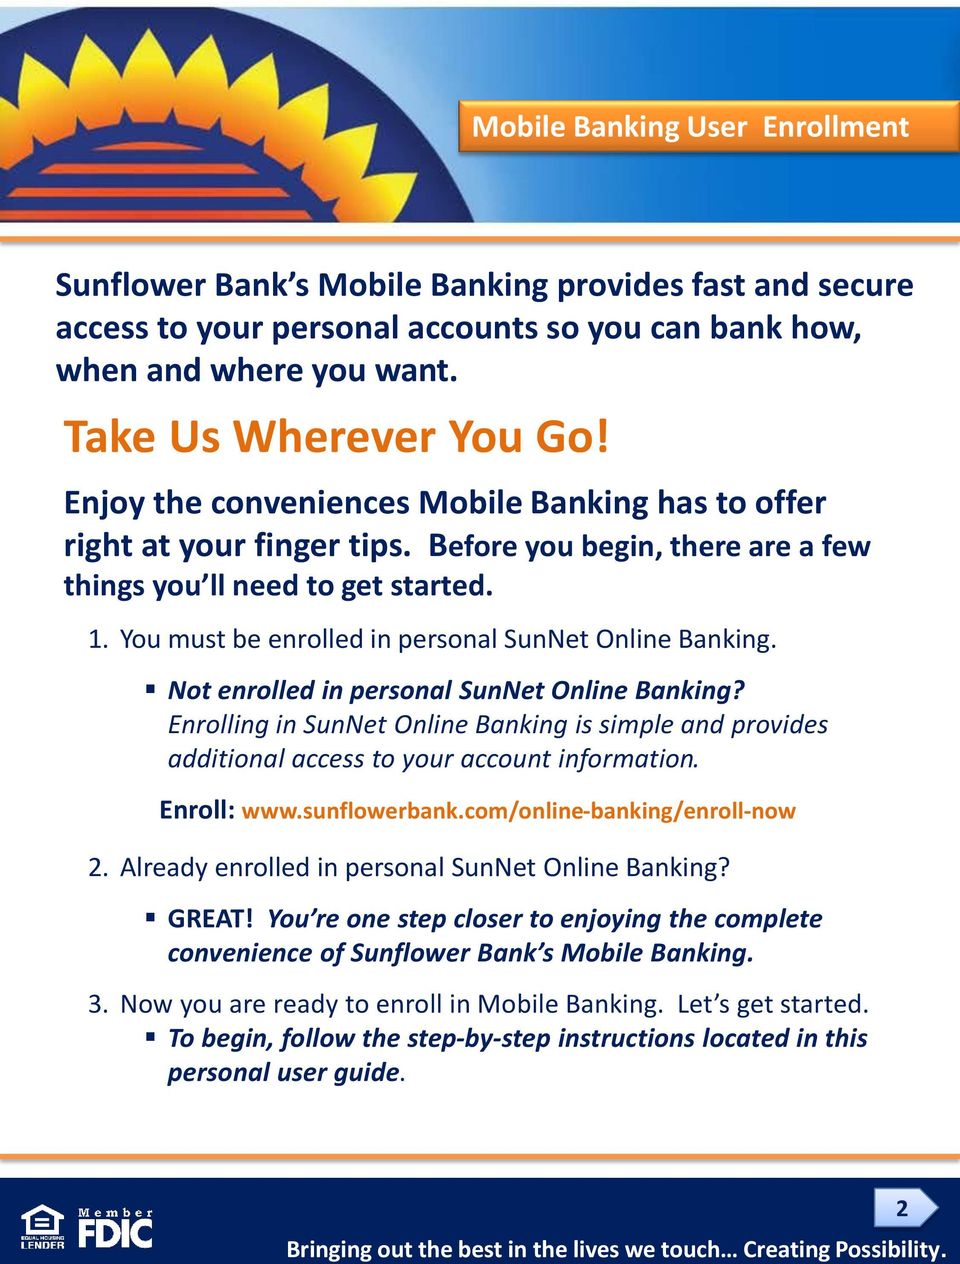 You must be enrolled in personal SunNet Online Banking. Not enrolled in personal SunNet Online Banking?